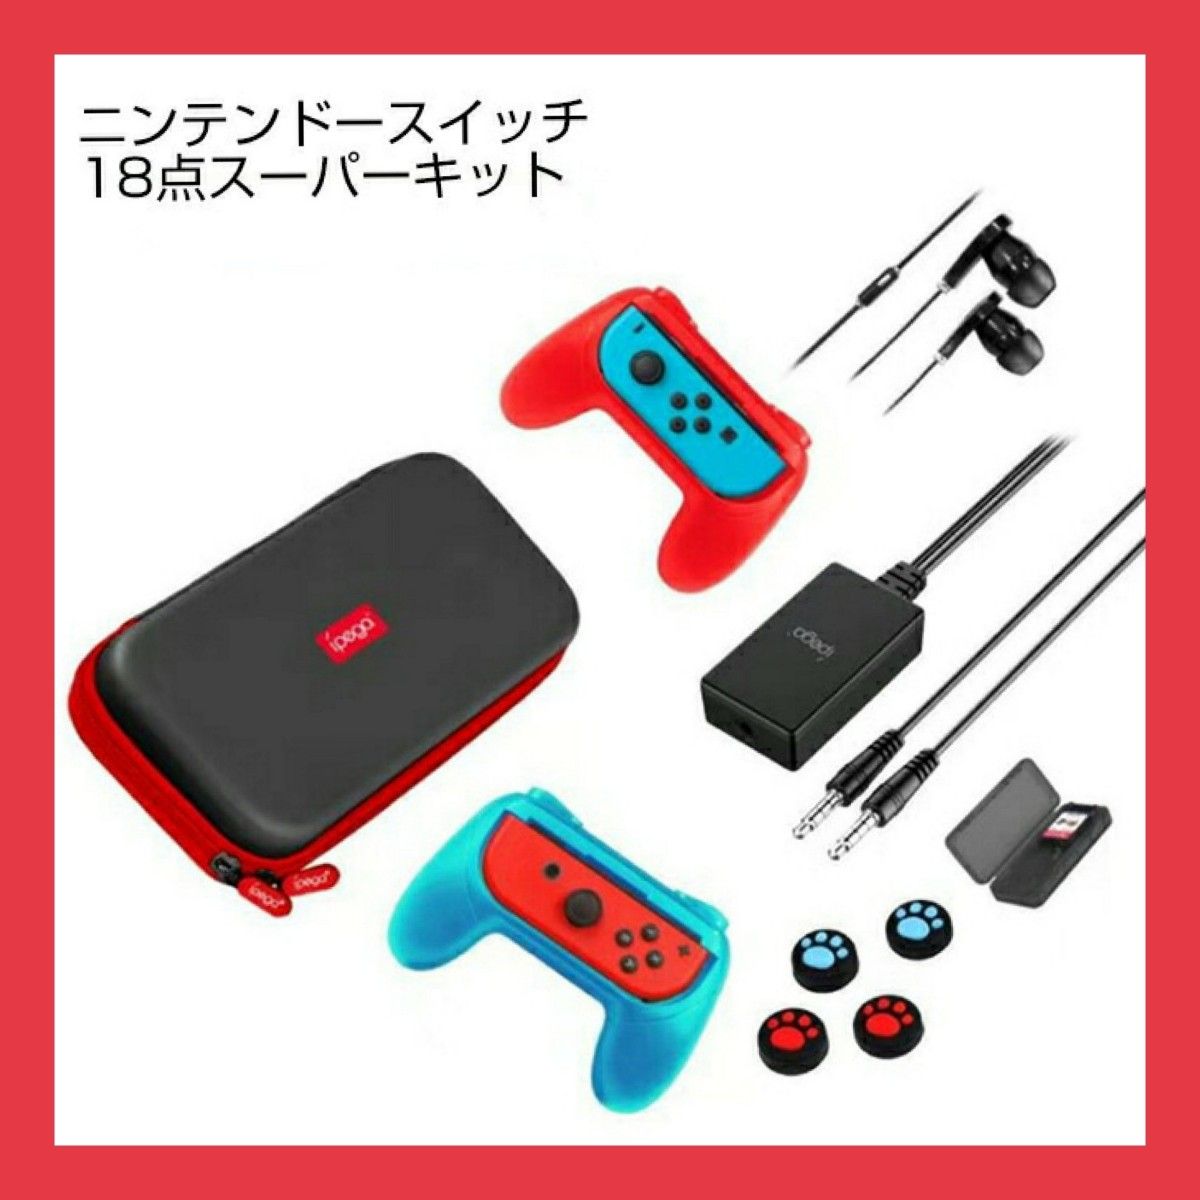 Nintendo Switch 18in1 Superkit スーパー キット